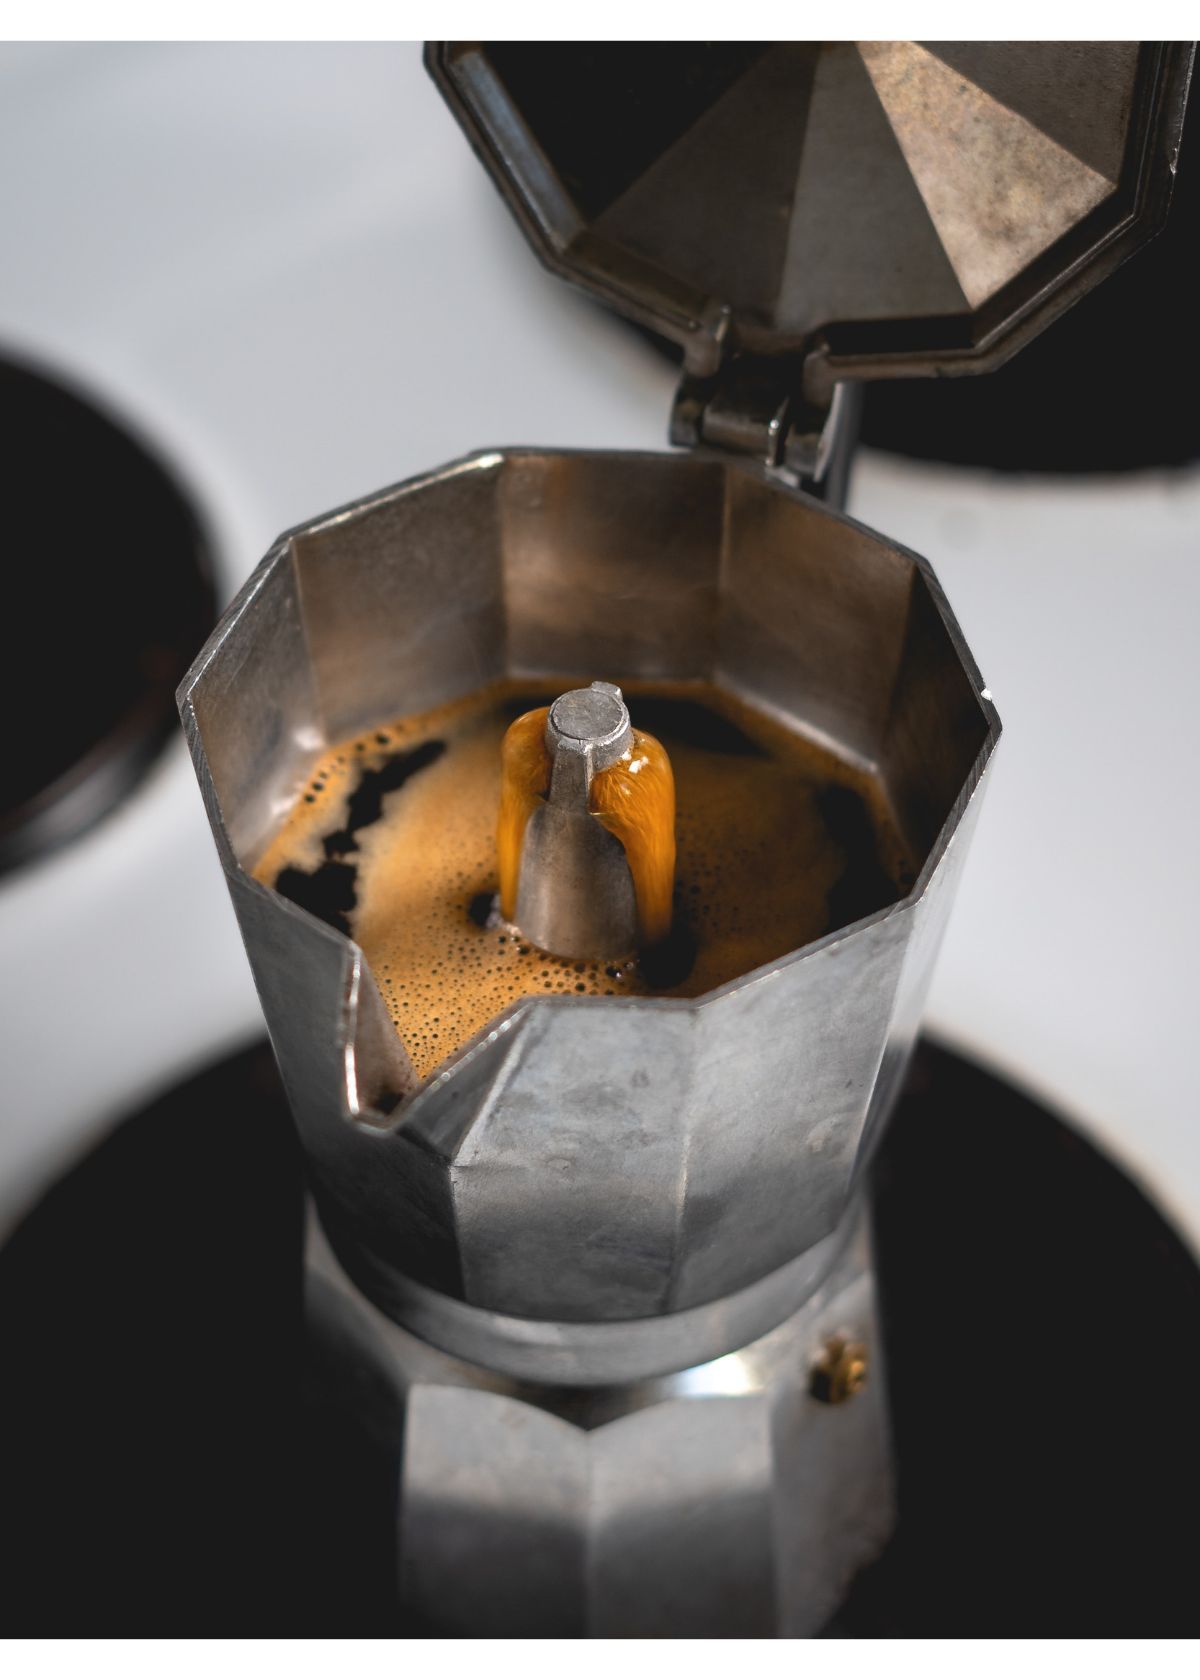 The Best Moka Pots for An Amazing Cup of Coffee